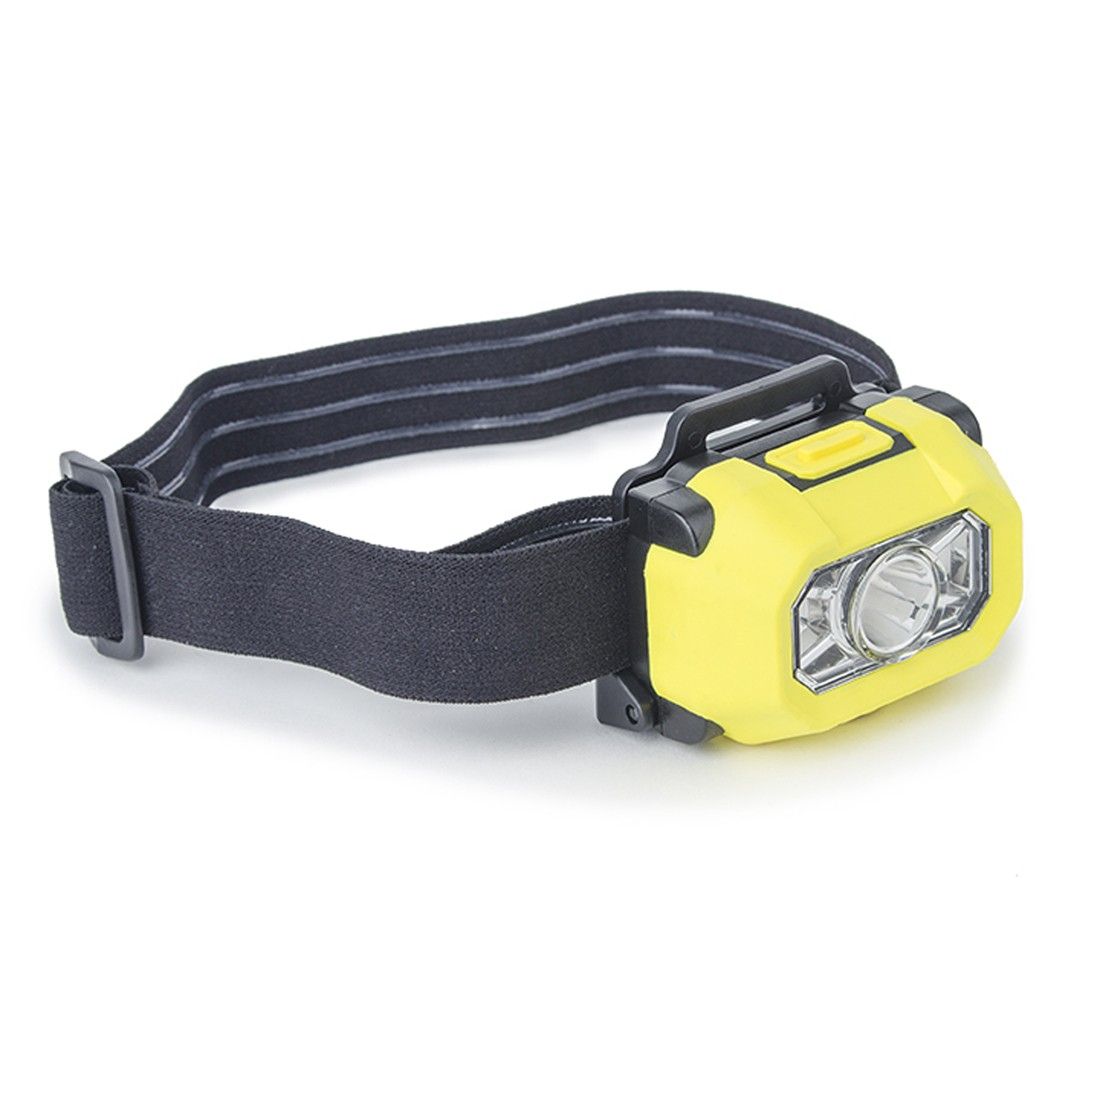 Coverguard - Lampe frontale ATEX LED 150 lm